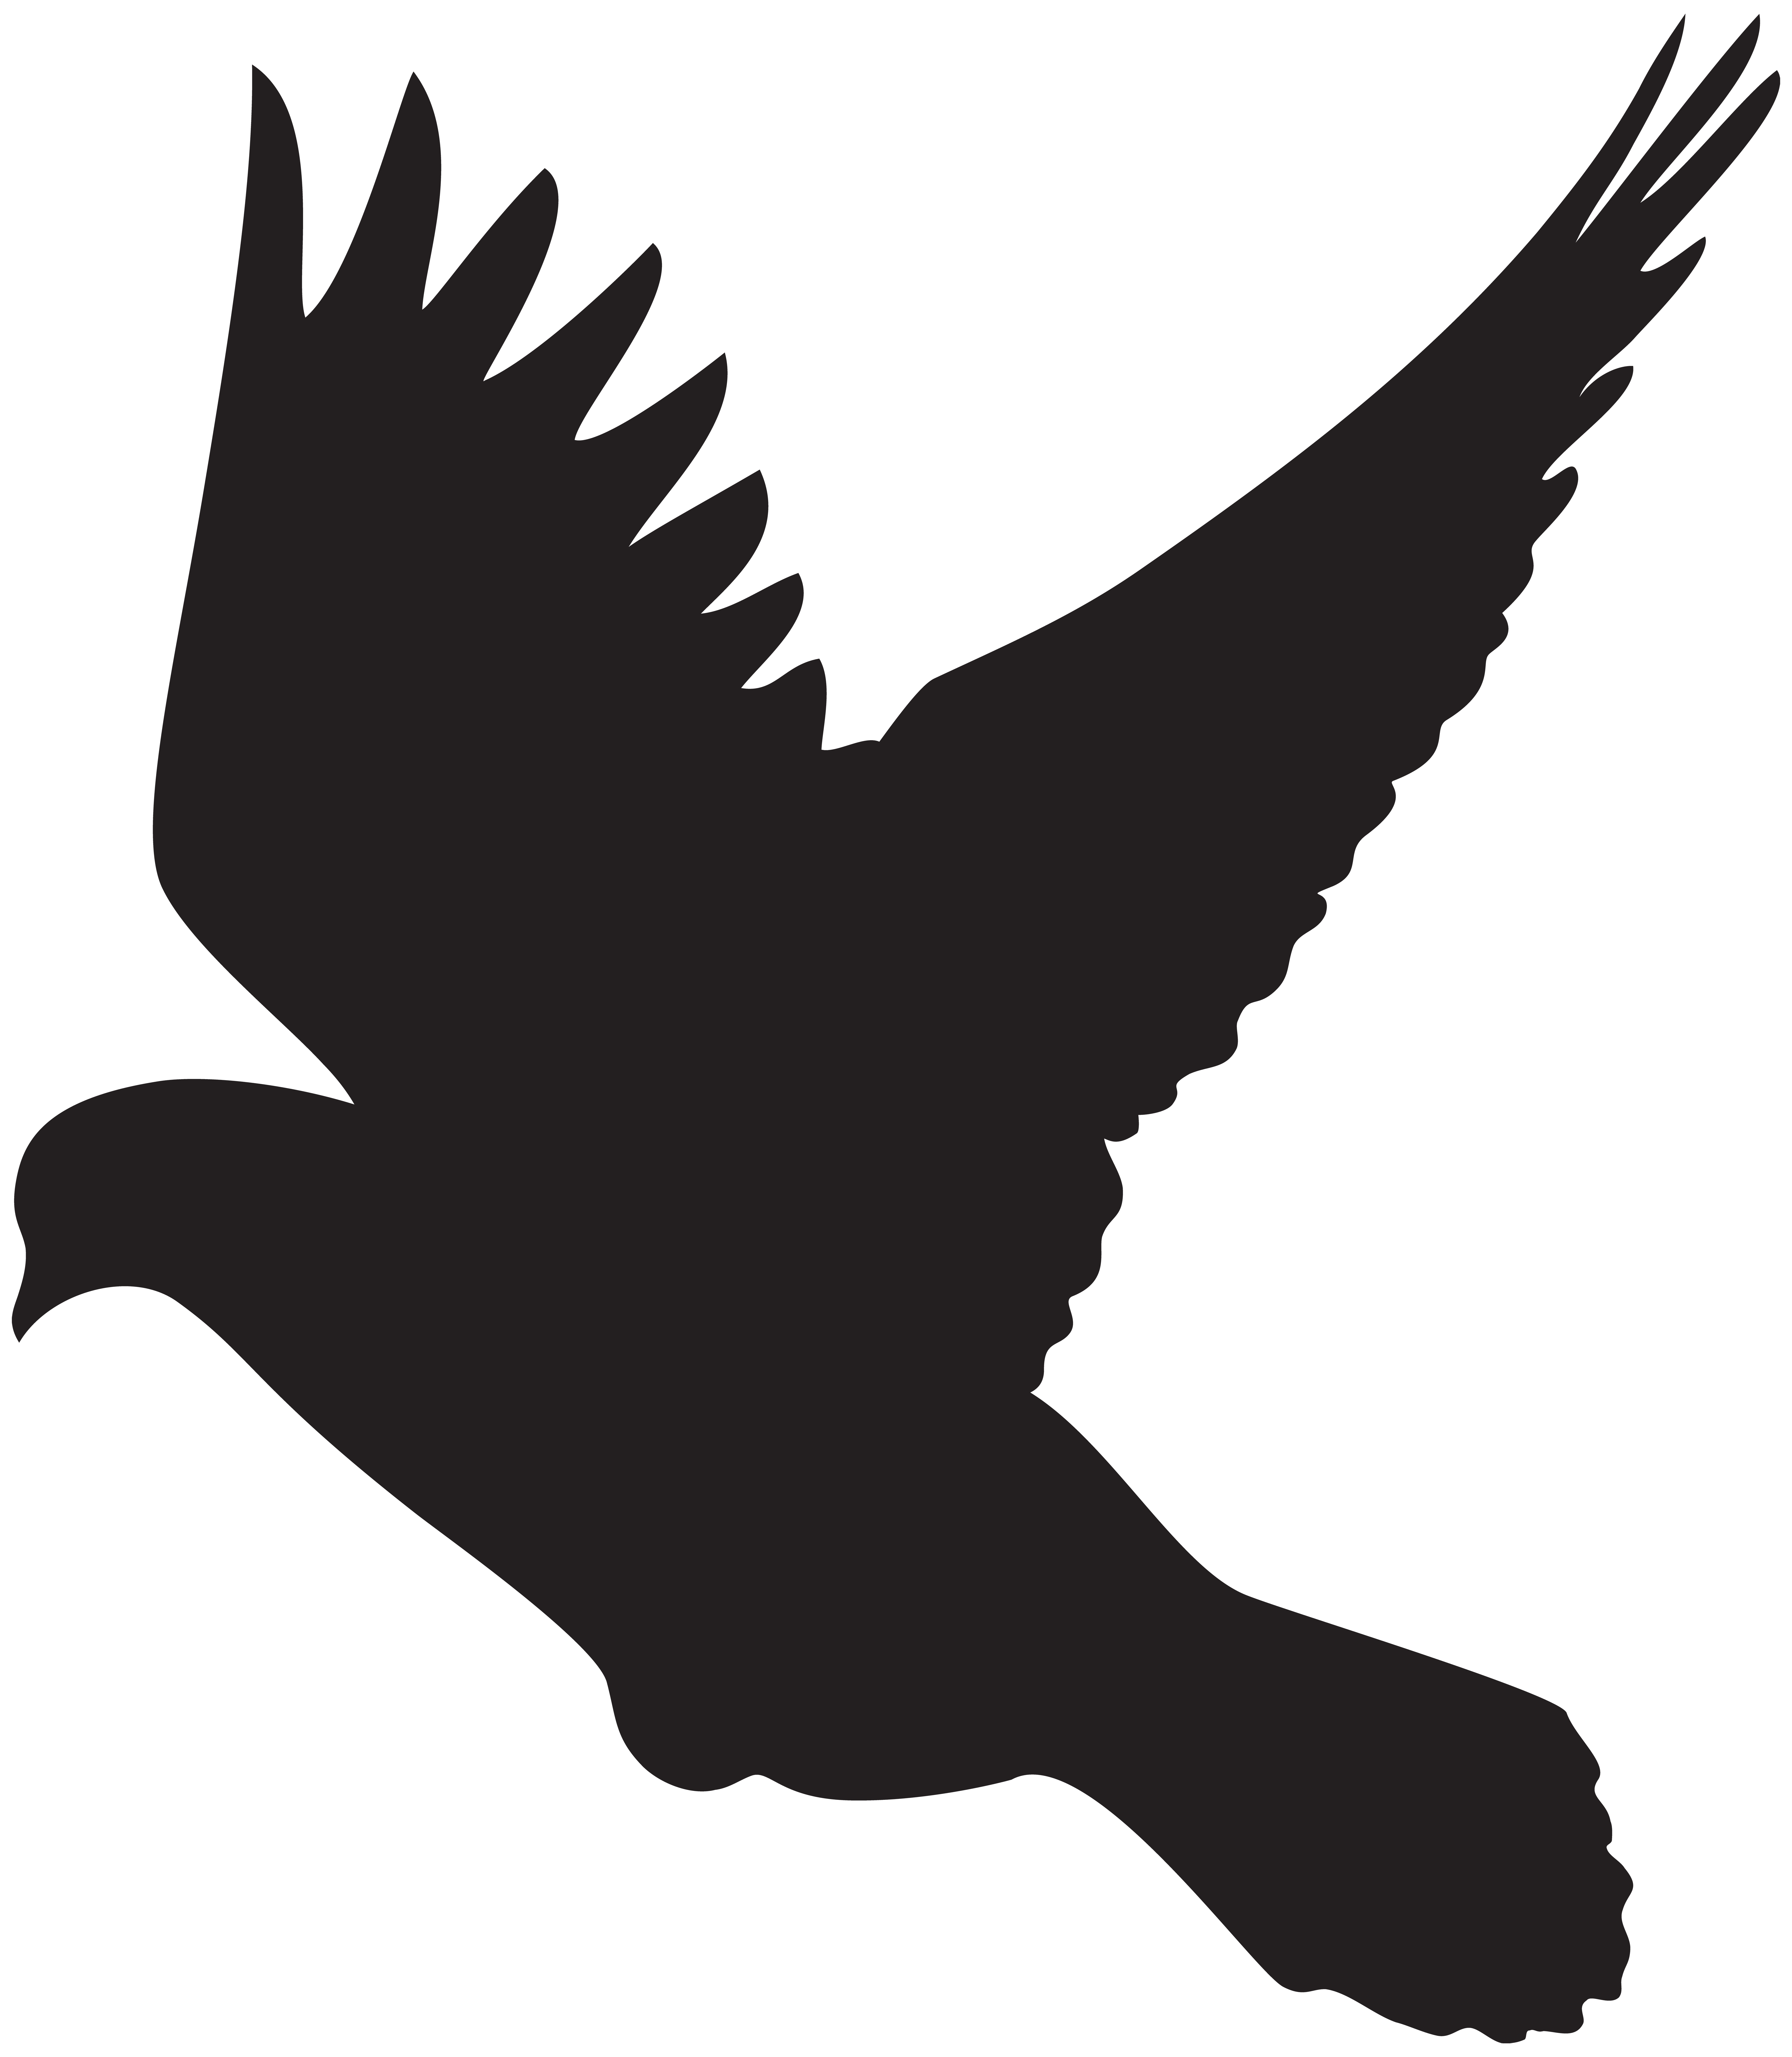 Pigeon clipart in flight. Silhouette at getdrawings com